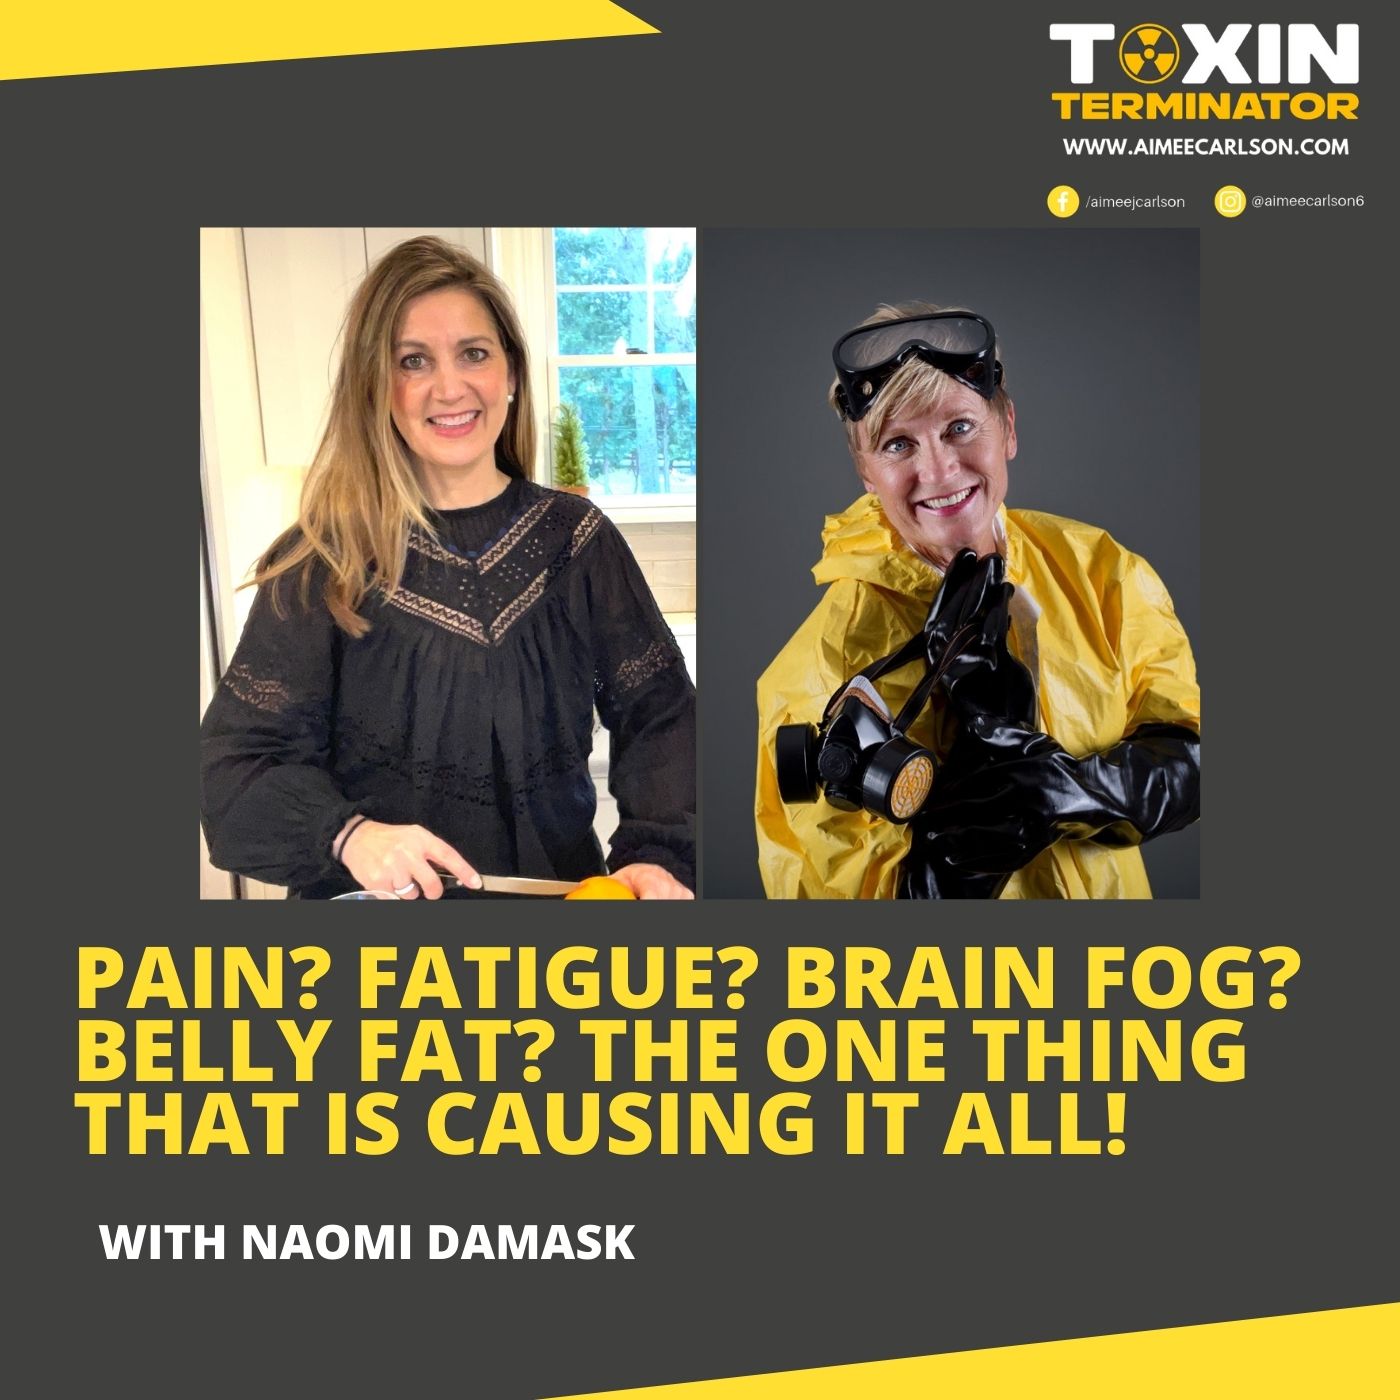 Pain? Fatigue? Brain Fog? Belly Fat? The ONE Thing That Is Causing It All! with Naomi Damask